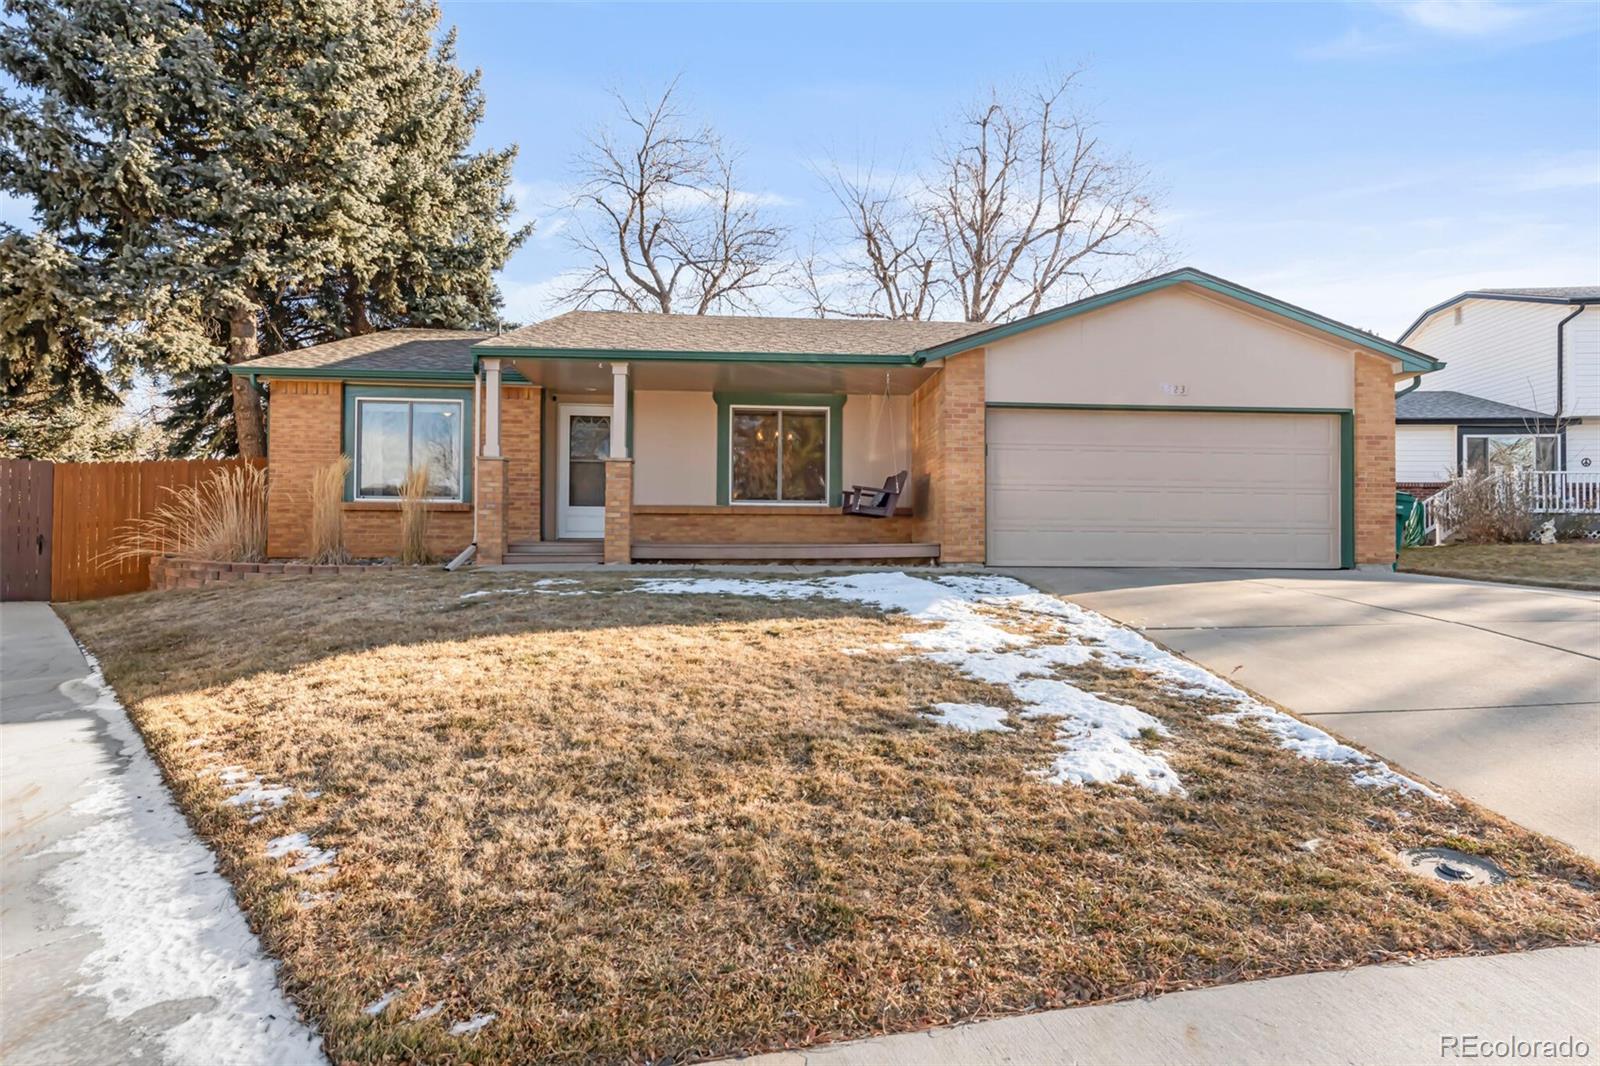 Report Image for 2523 W 105th Court,Westminster, Colorado